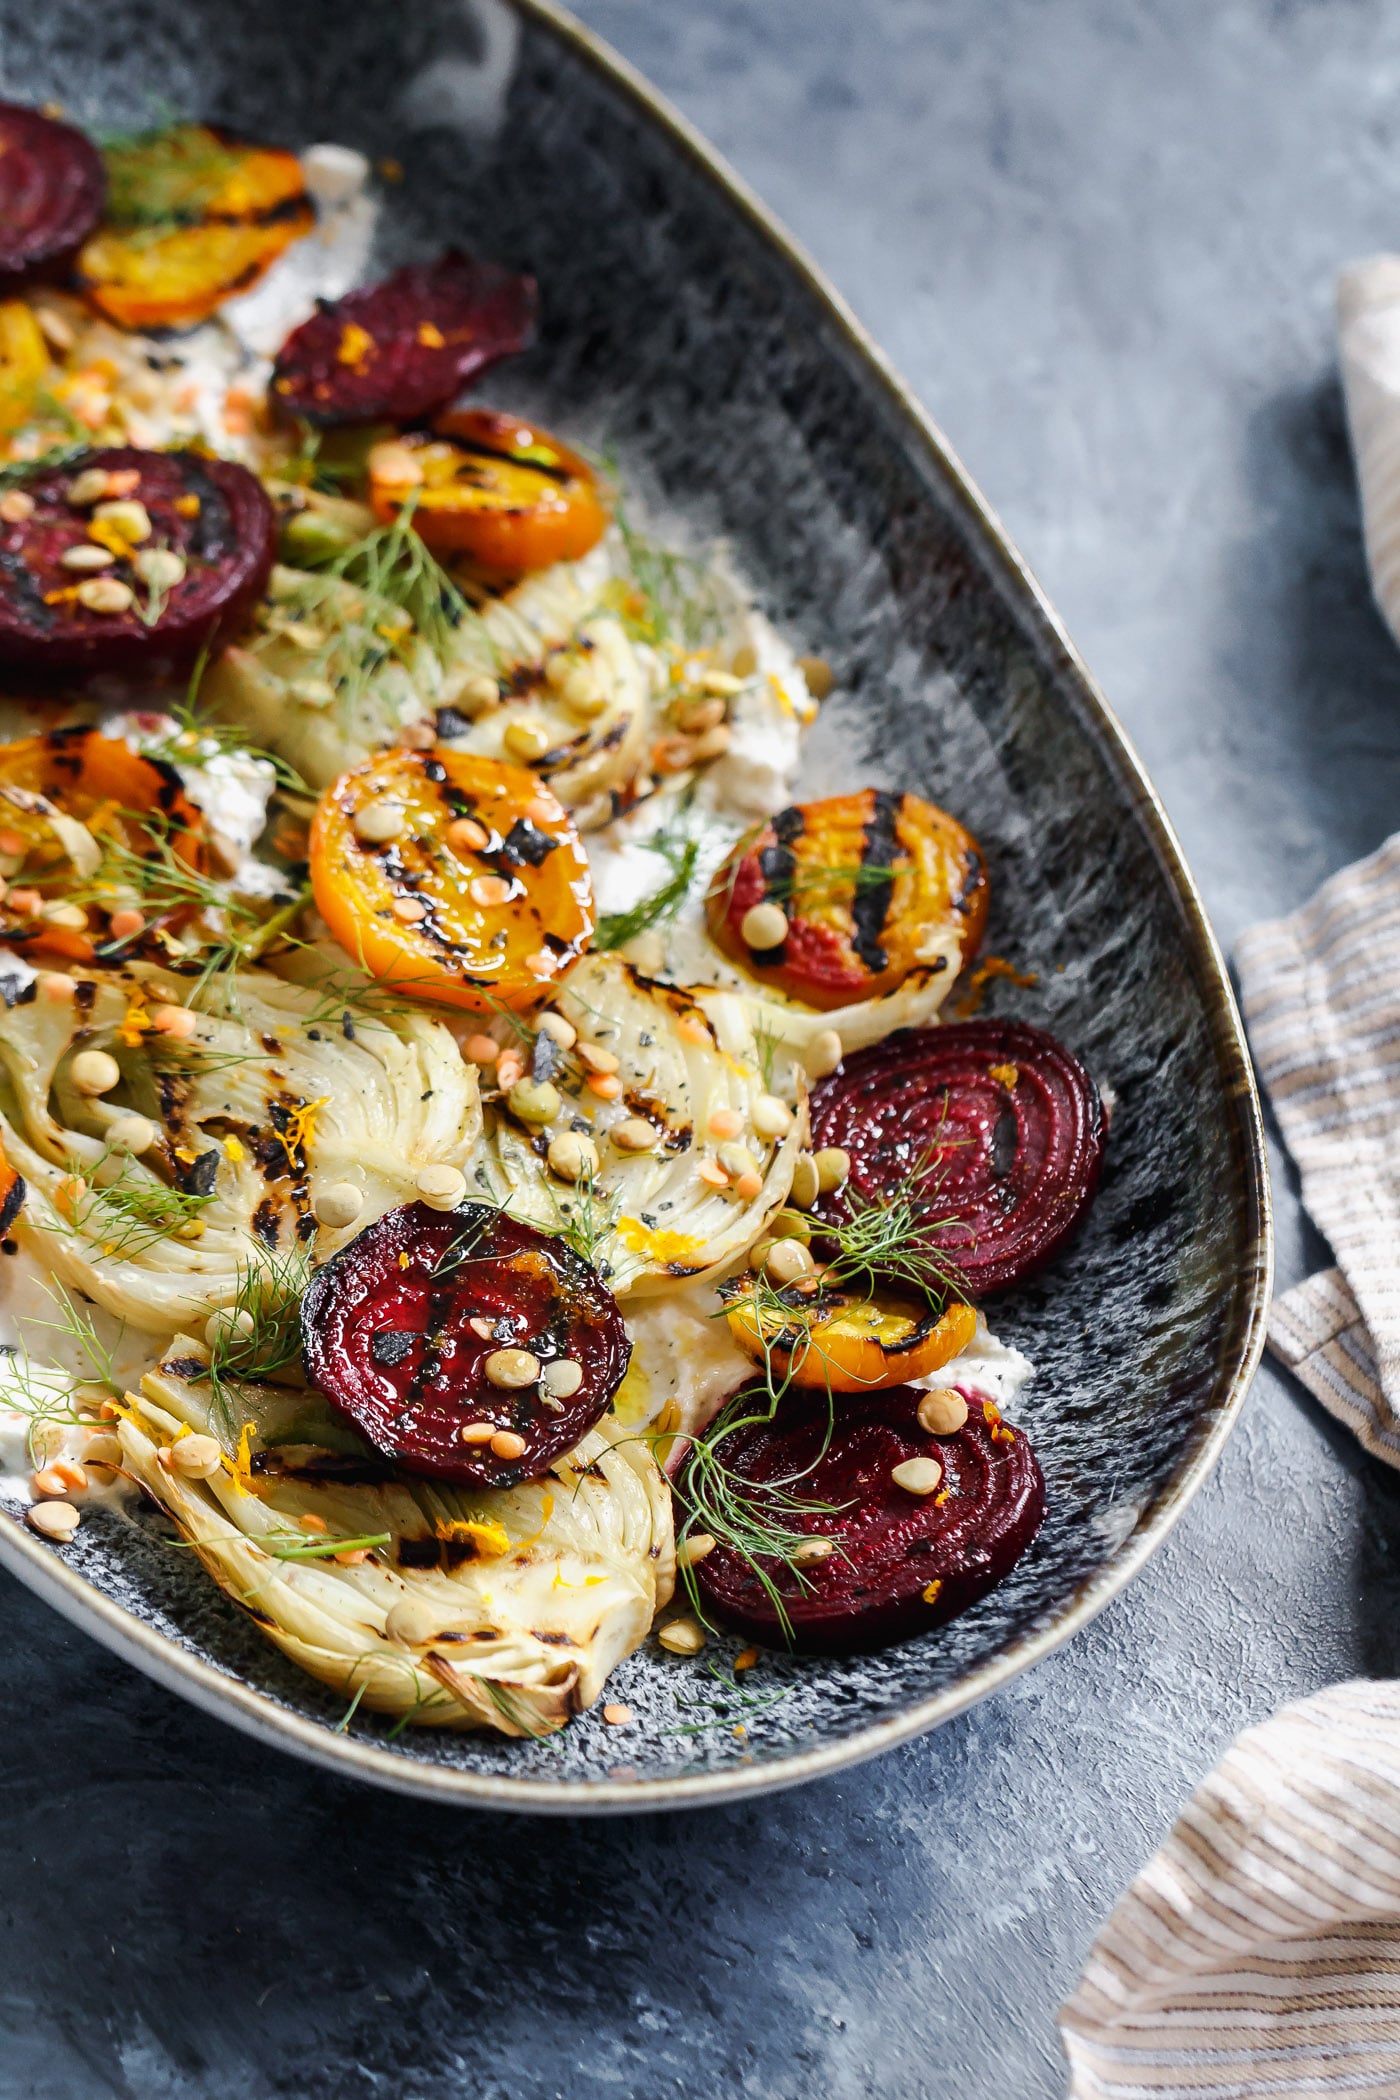 Grilled Beet And Fennel Salad Recipe With Sprouted Lentils Vegan